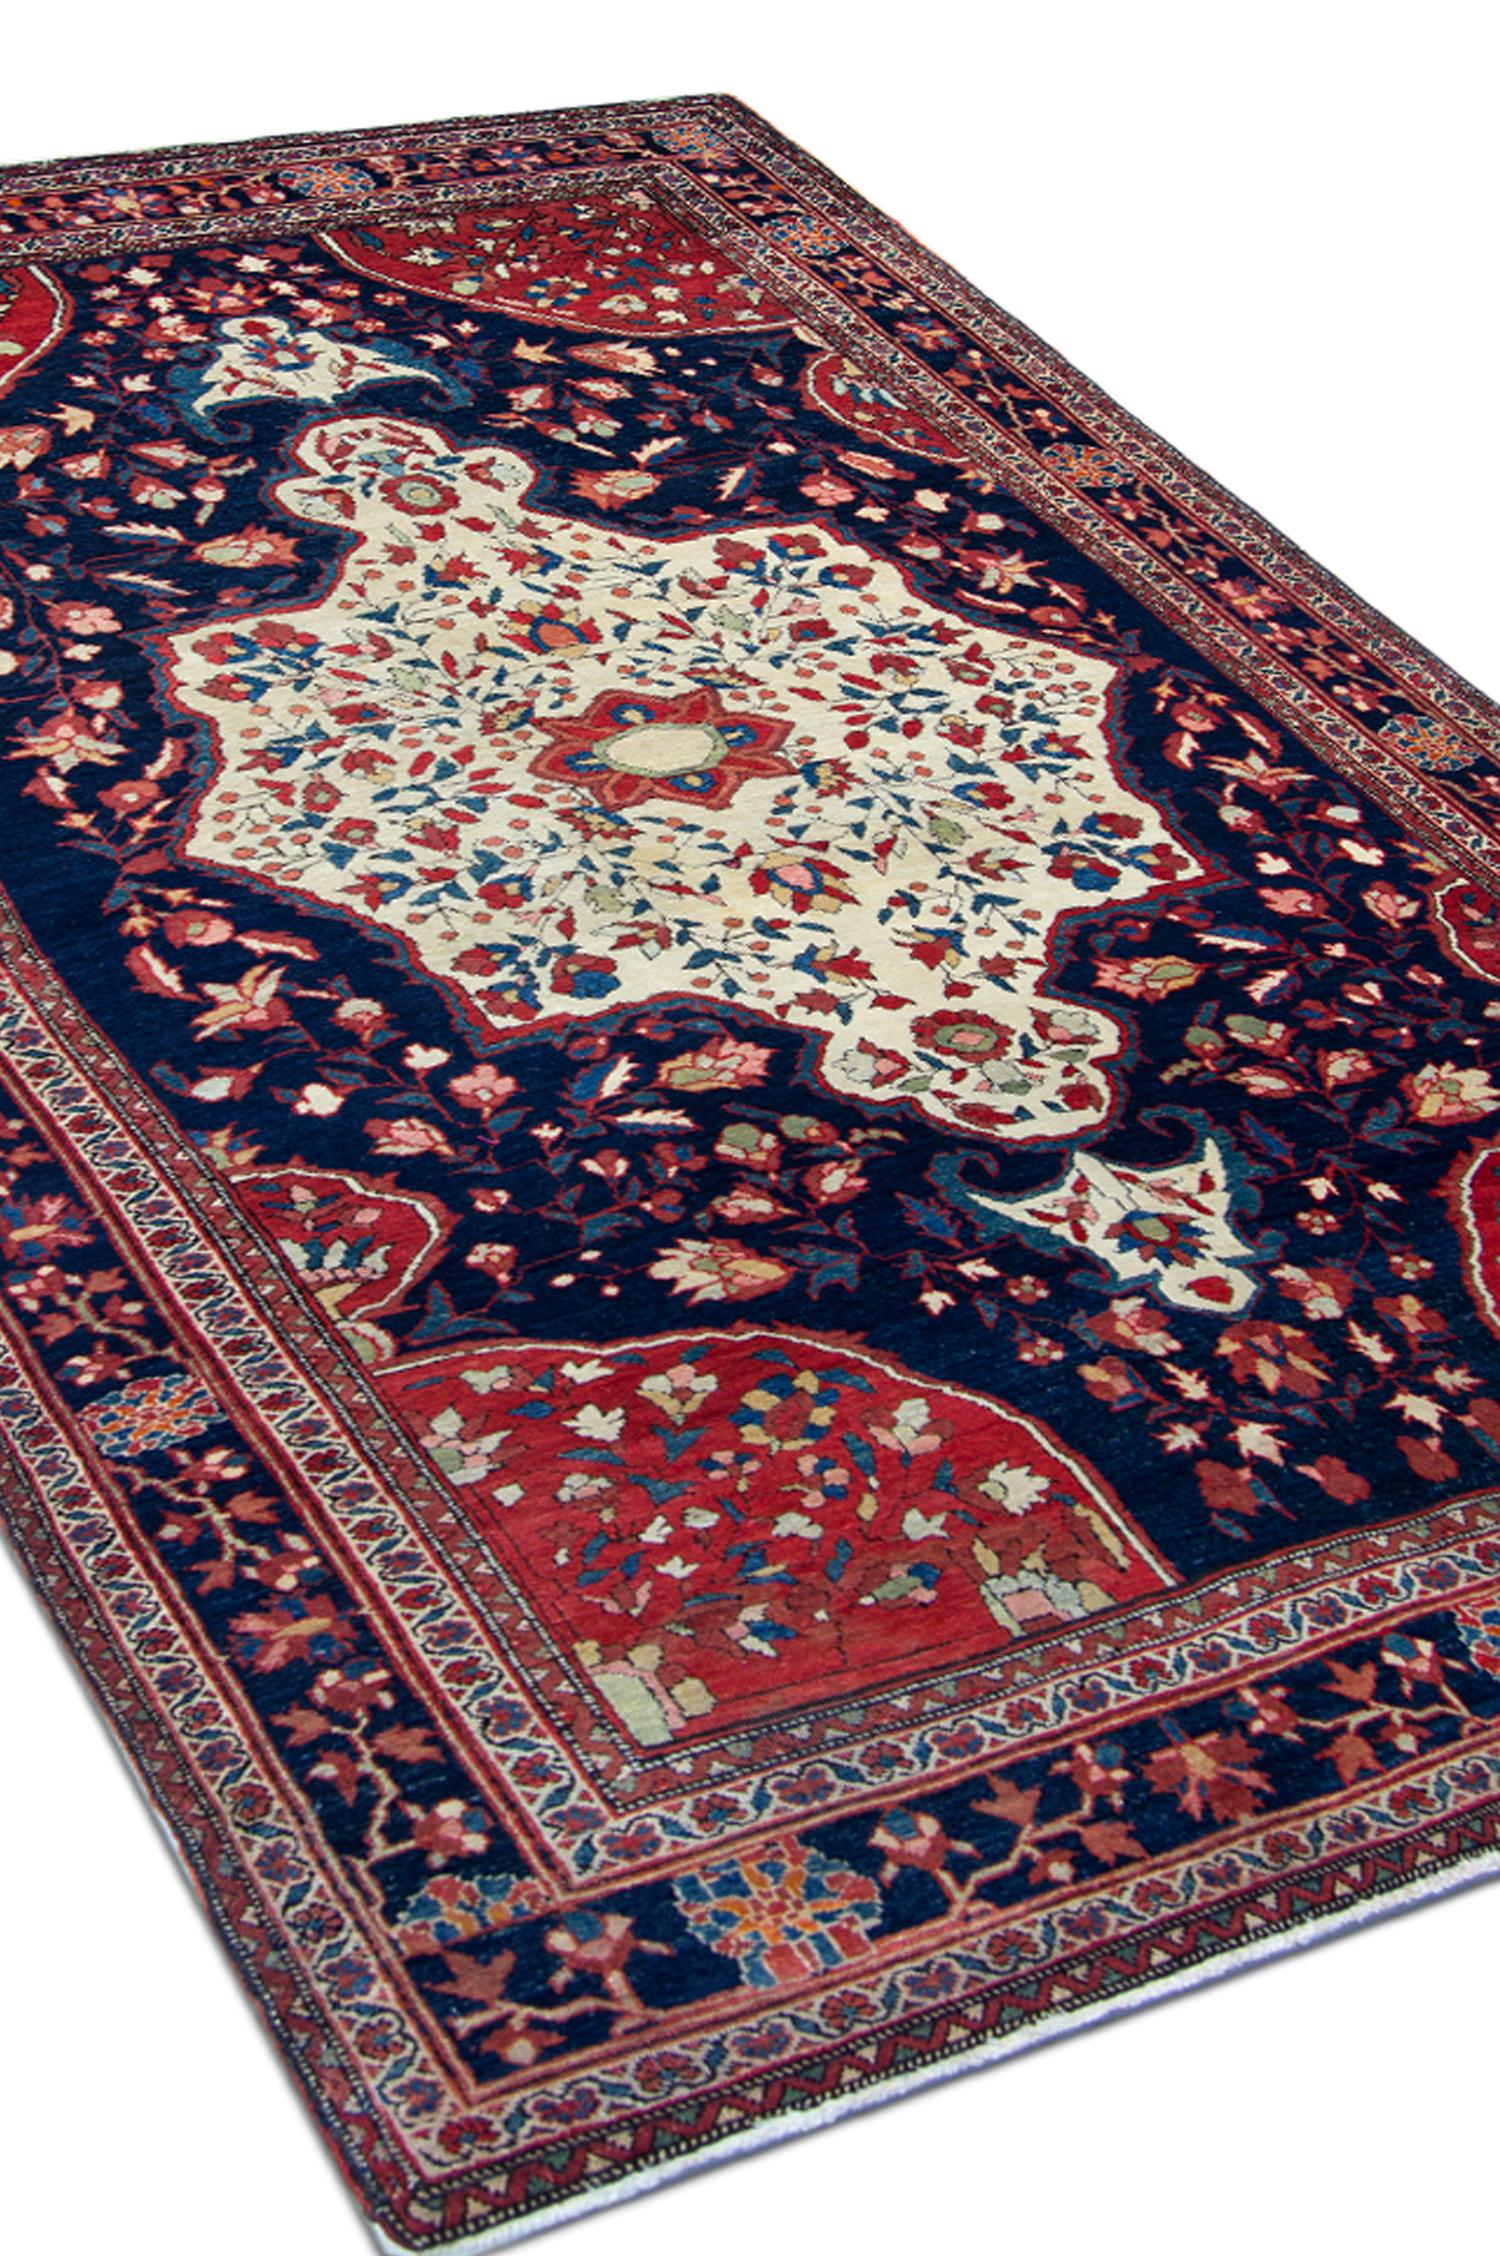 Exclusive ntique area rug was woven in the 1880s with only the finest materials. It features a deep blue background and a charming red and cream medallion in the centre, representing typical traditional design. The colour and design featured in this